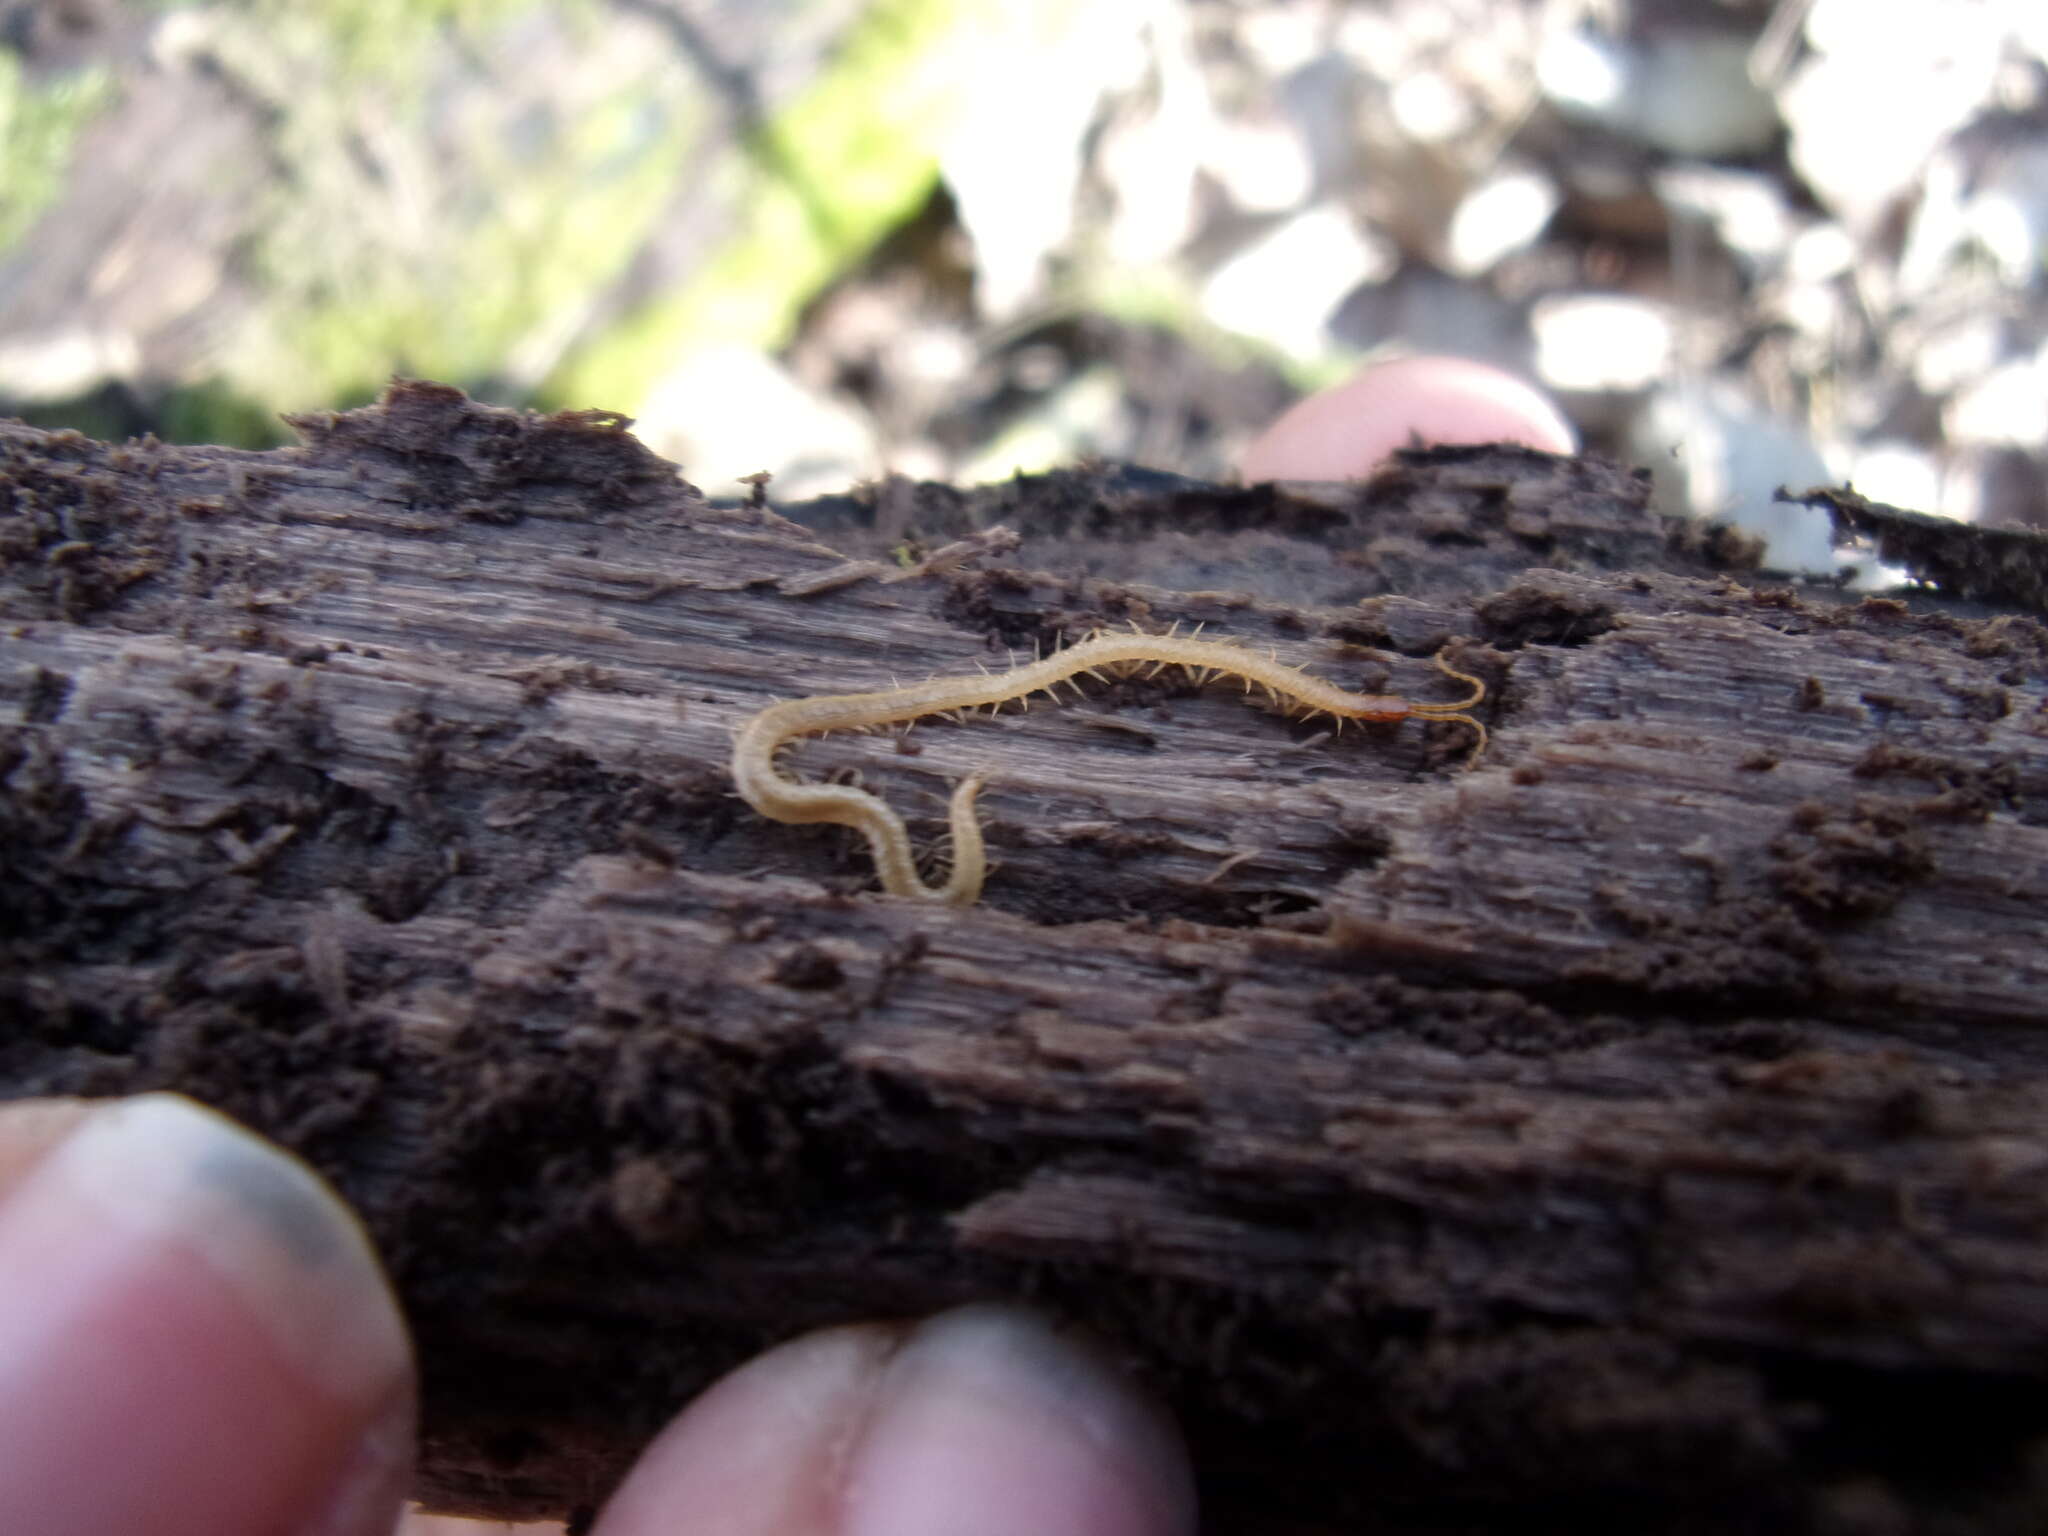 Image of boreal yellow-headed soil centipede